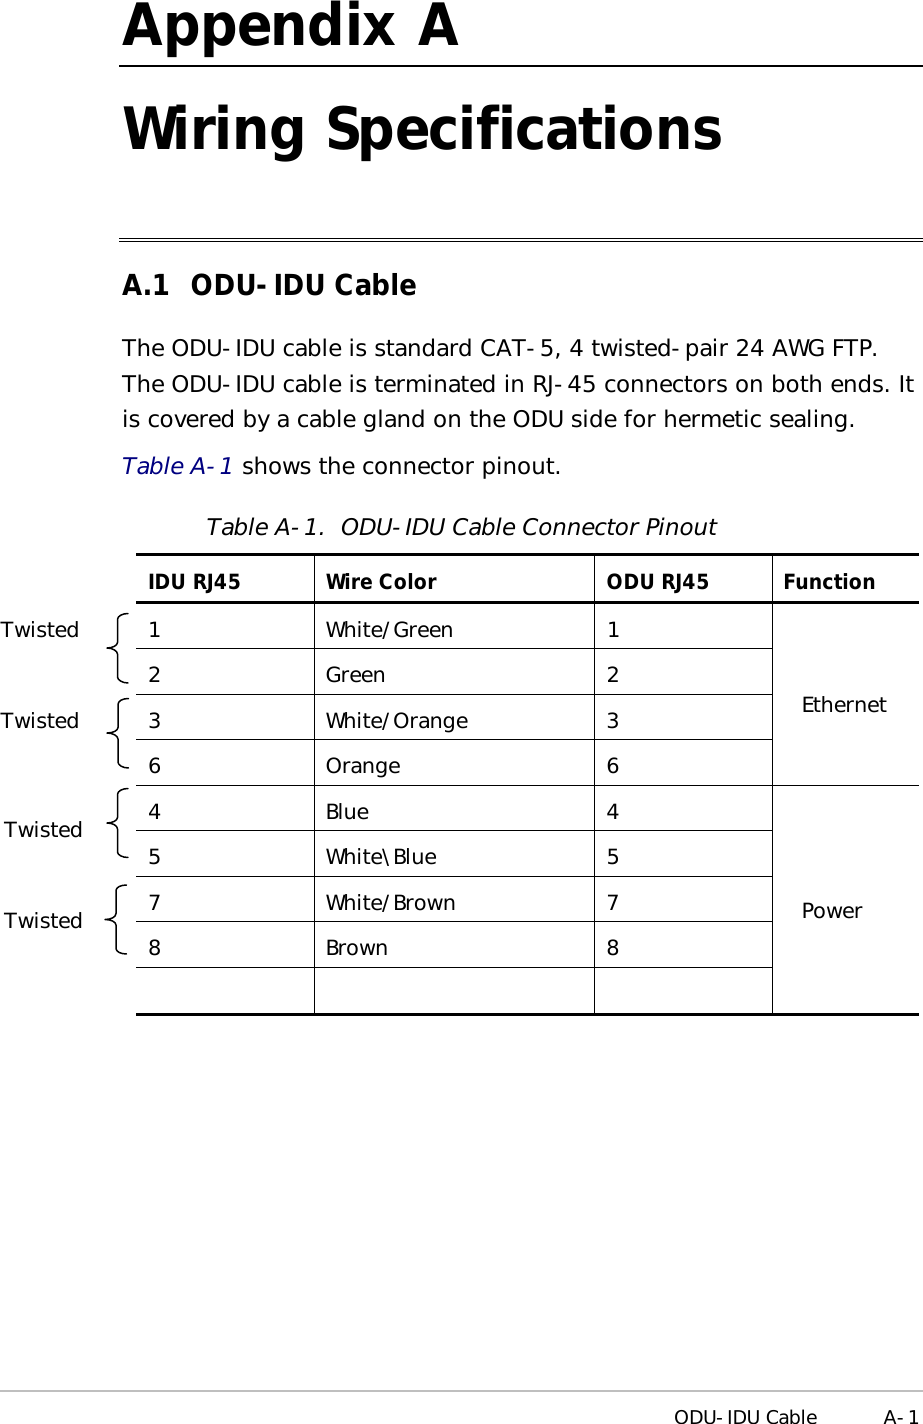  ODU-IDU Cable A-1 Appendix  A Wiring Specifications A.1  ODU-IDU Cable  The ODU-IDU cable is standard CAT-5, 4 twisted-pair 24 AWG FTP. The ODU-IDU cable is terminated in RJ-45 connectors on both ends. It is covered by a cable gland on the ODU side for hermetic sealing. Table  A-1 shows the connector pinout. Table  A-1.  ODU-IDU Cable Connector Pinout  IDU RJ45 Wire Color ODU RJ45 Function 1 White/Green 1 Twisted 2 Green 2 3 White/Orange 3 Twisted 6 Orange 6 Ethernet 4 Blue 4 Twisted  5 White\Blue 5 7 White/Brown 7 8 Brown 8 Twisted    Power 